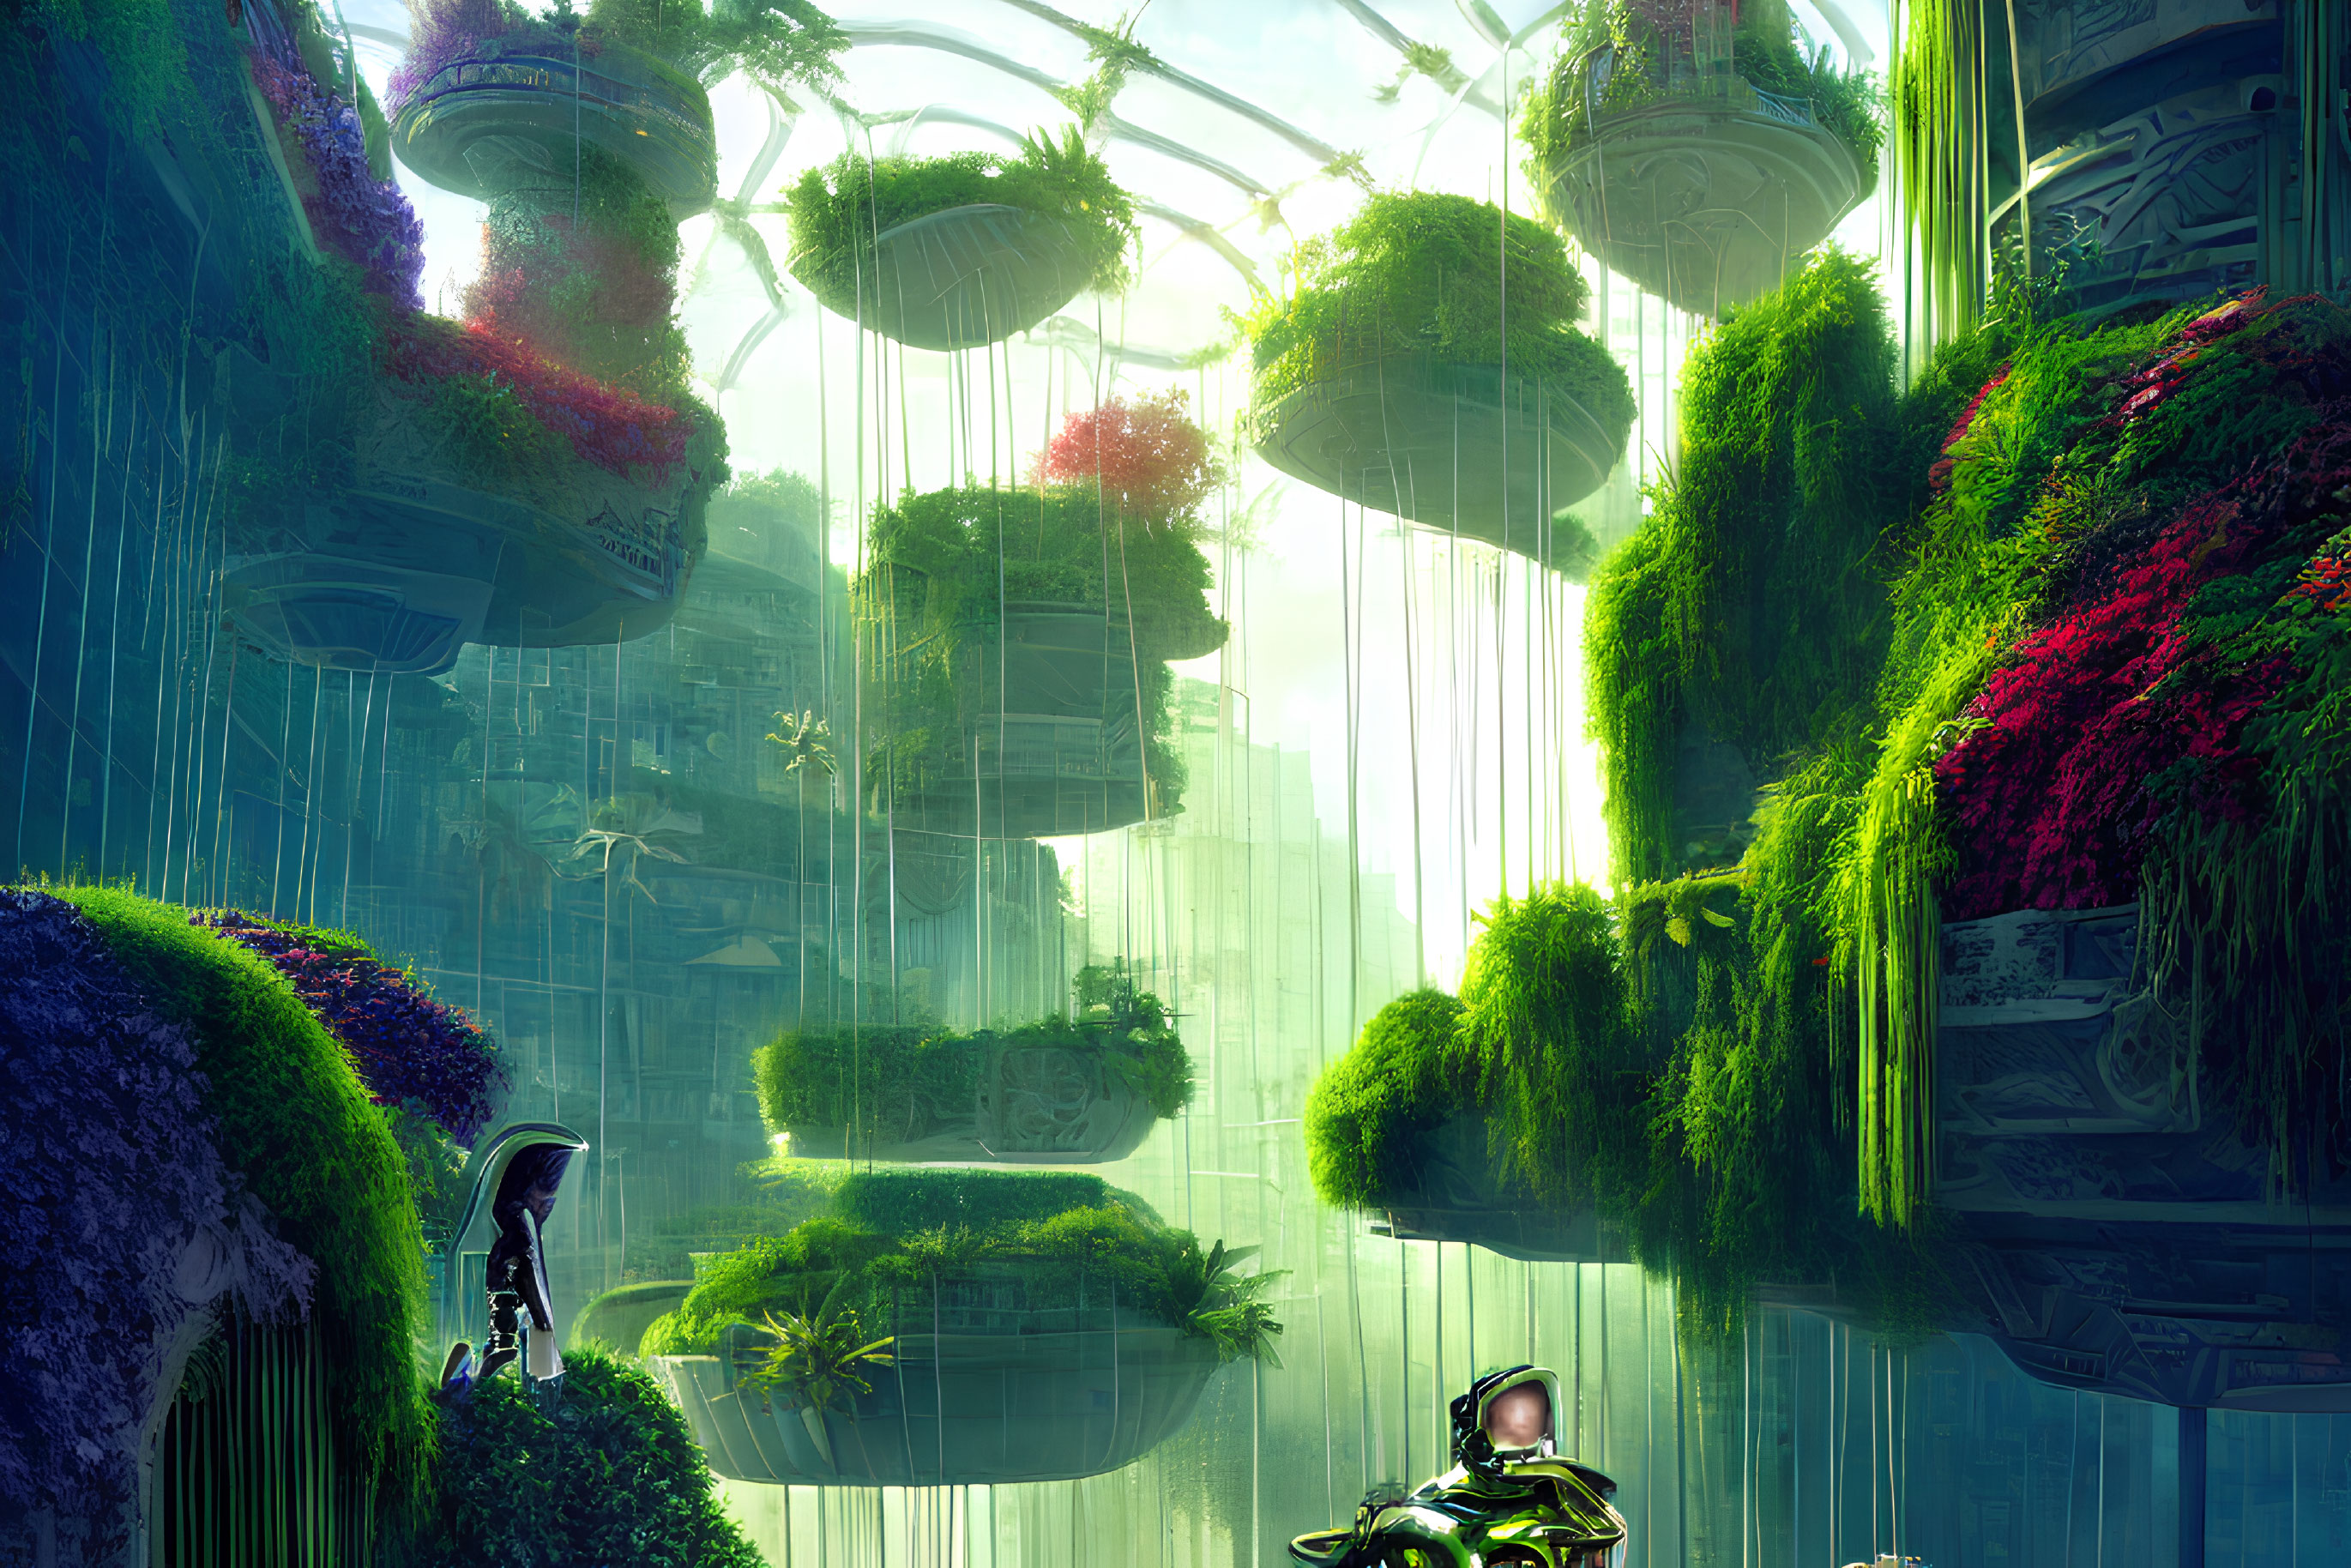 Futuristic greenhouse with floating gardens and person in high-tech suit.